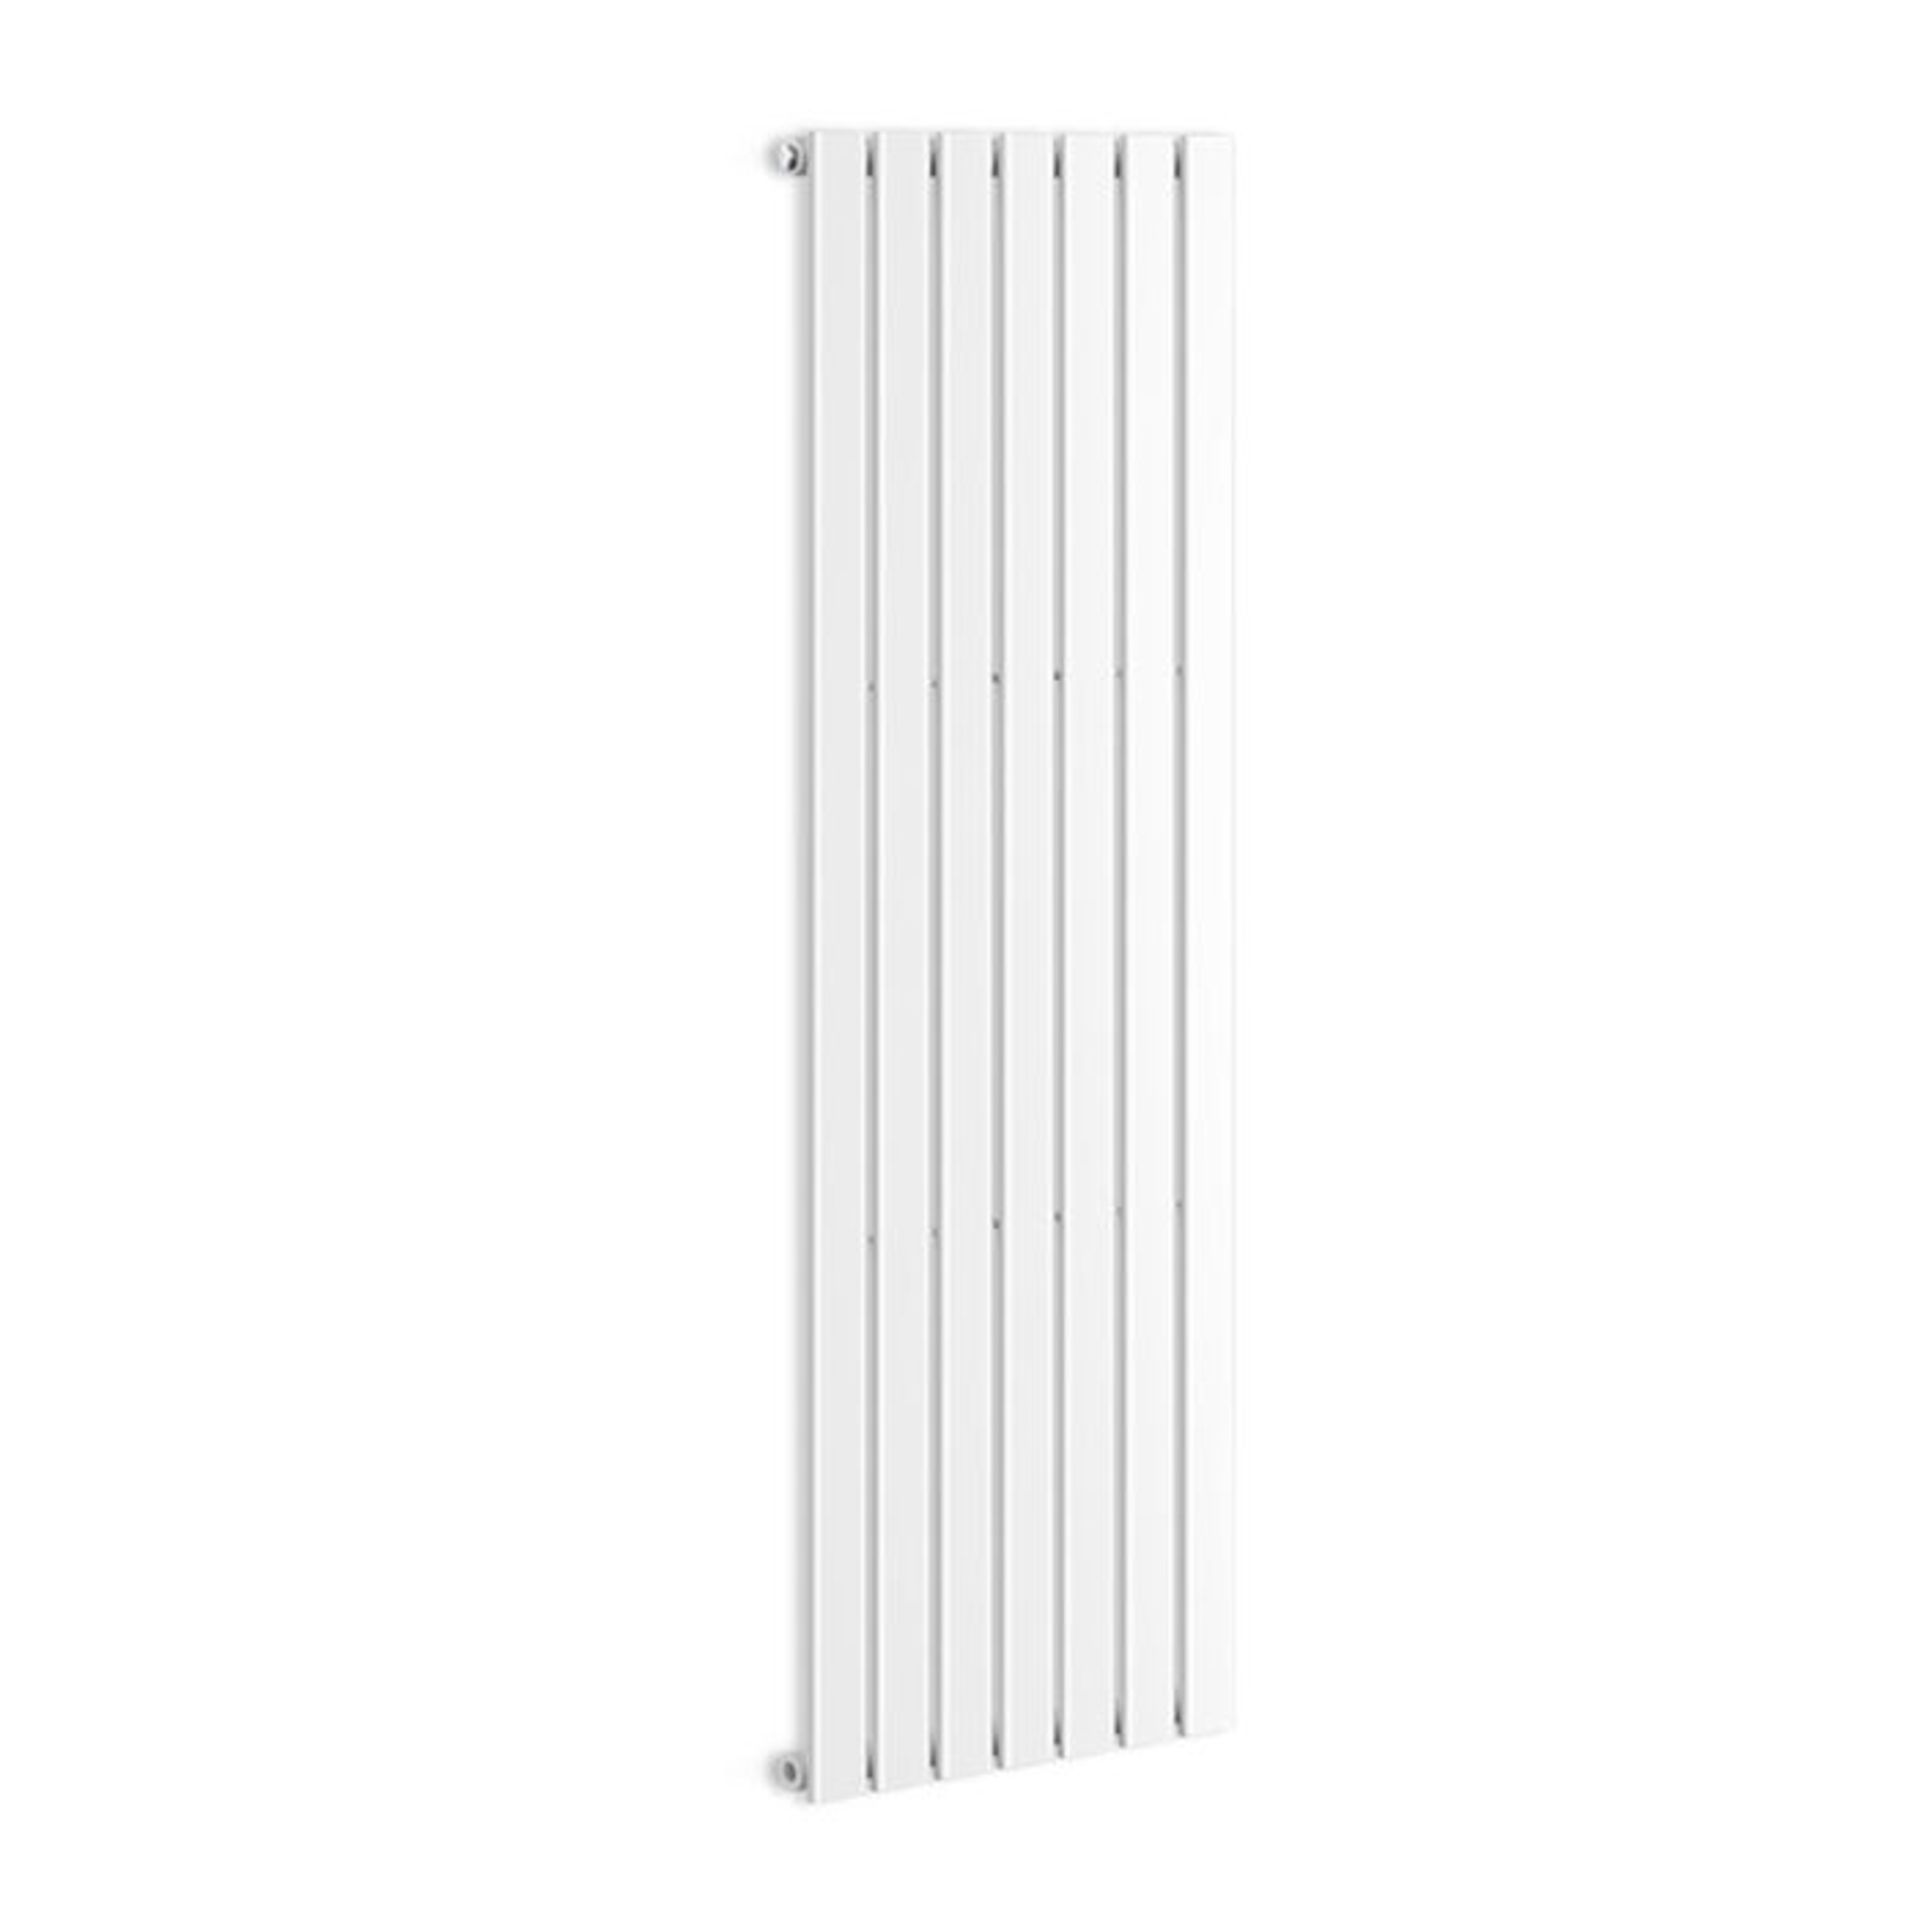 (CP87) 1800x532mm White Panel Vertical Radiator. RRP £339.99. This streamlined flat panel